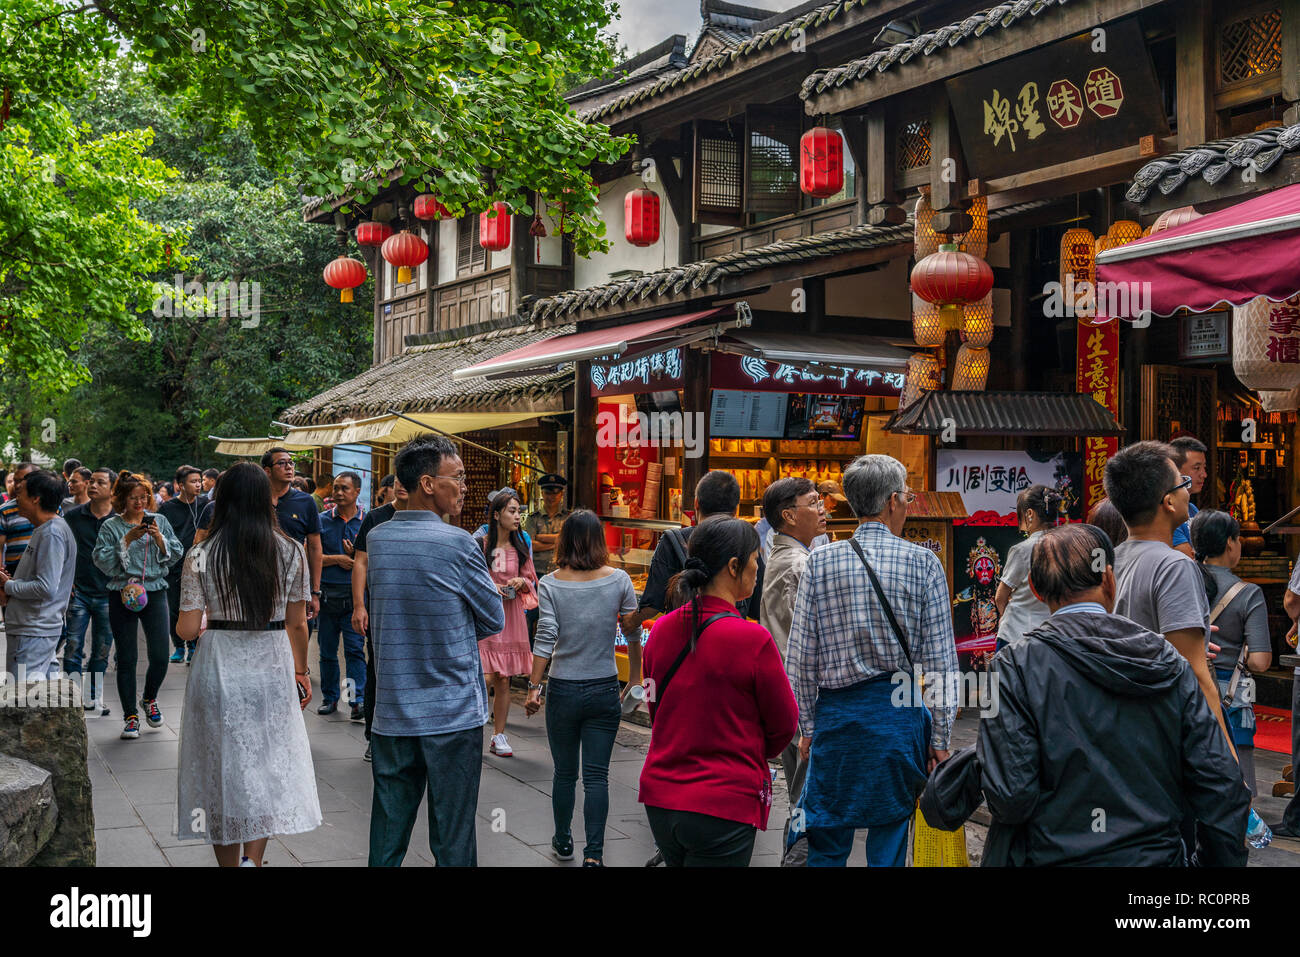 CHENGDU, CHINA - SEPTEMBER 25: Shops and tourists at Jinli Ancient Street an historic pedestrian street and popular travel destination on September 25 Stock Photo